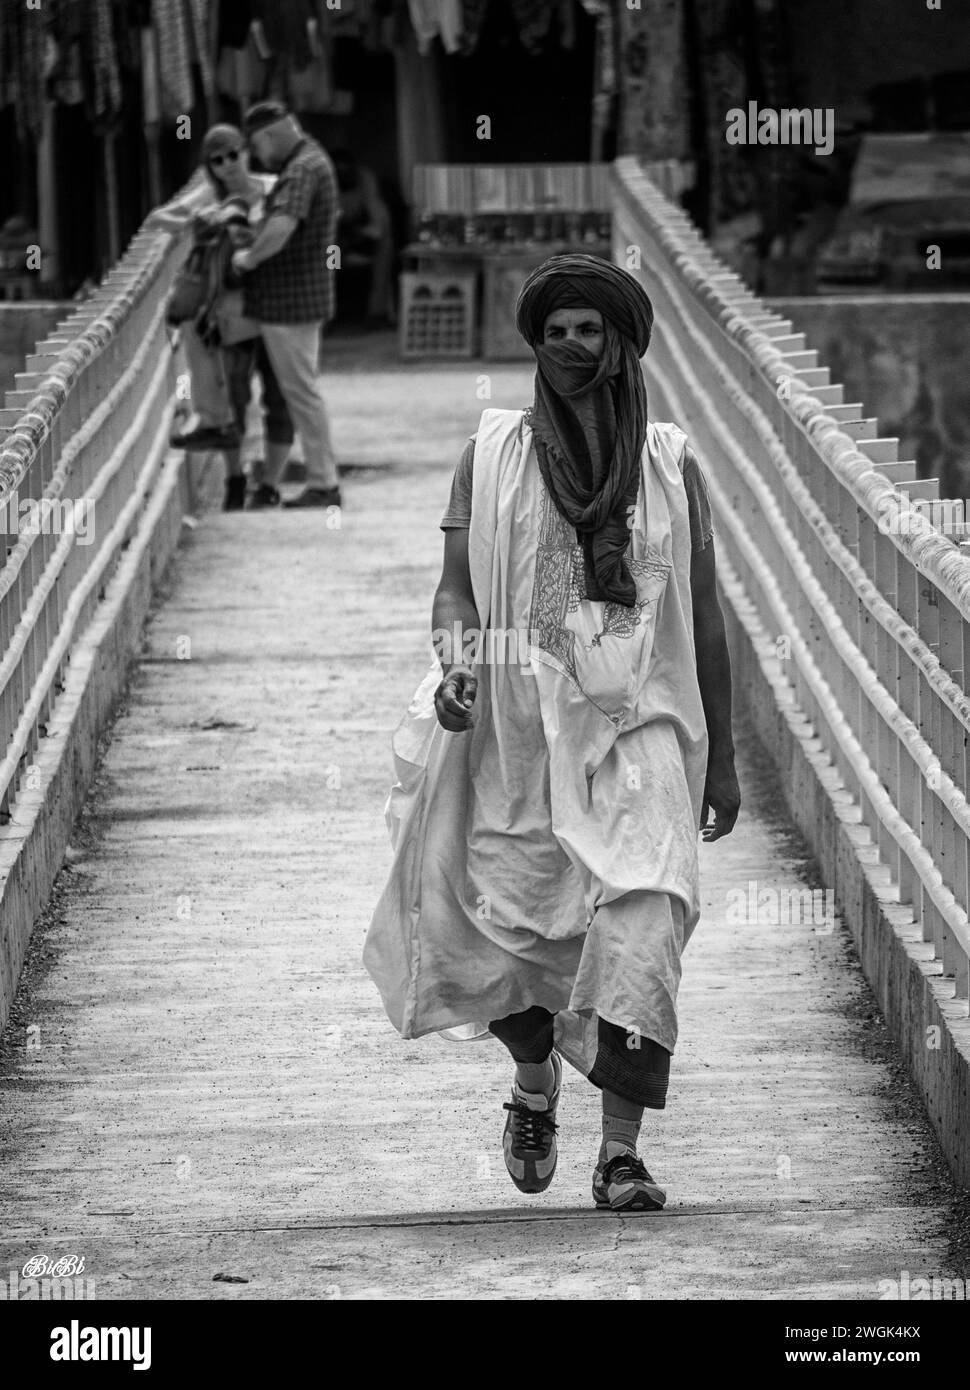 A local arab man in traditional dress crossing a bridge in Merzouga, a small Moroccan town in the Sahara Desert, near the Algerian border. It’s known as a gateway to Erg Chebbi, a huge expanse of sand dunes north of town. West of Merzouga, Dayet Srji is a seasonal salt lake that’s often dry in summer. When full, it attracts a wide range of migratory and desert birds, including desert warblers, Egyptian nightjars and, occasionally, flamingos. Morocco. Stock Photo